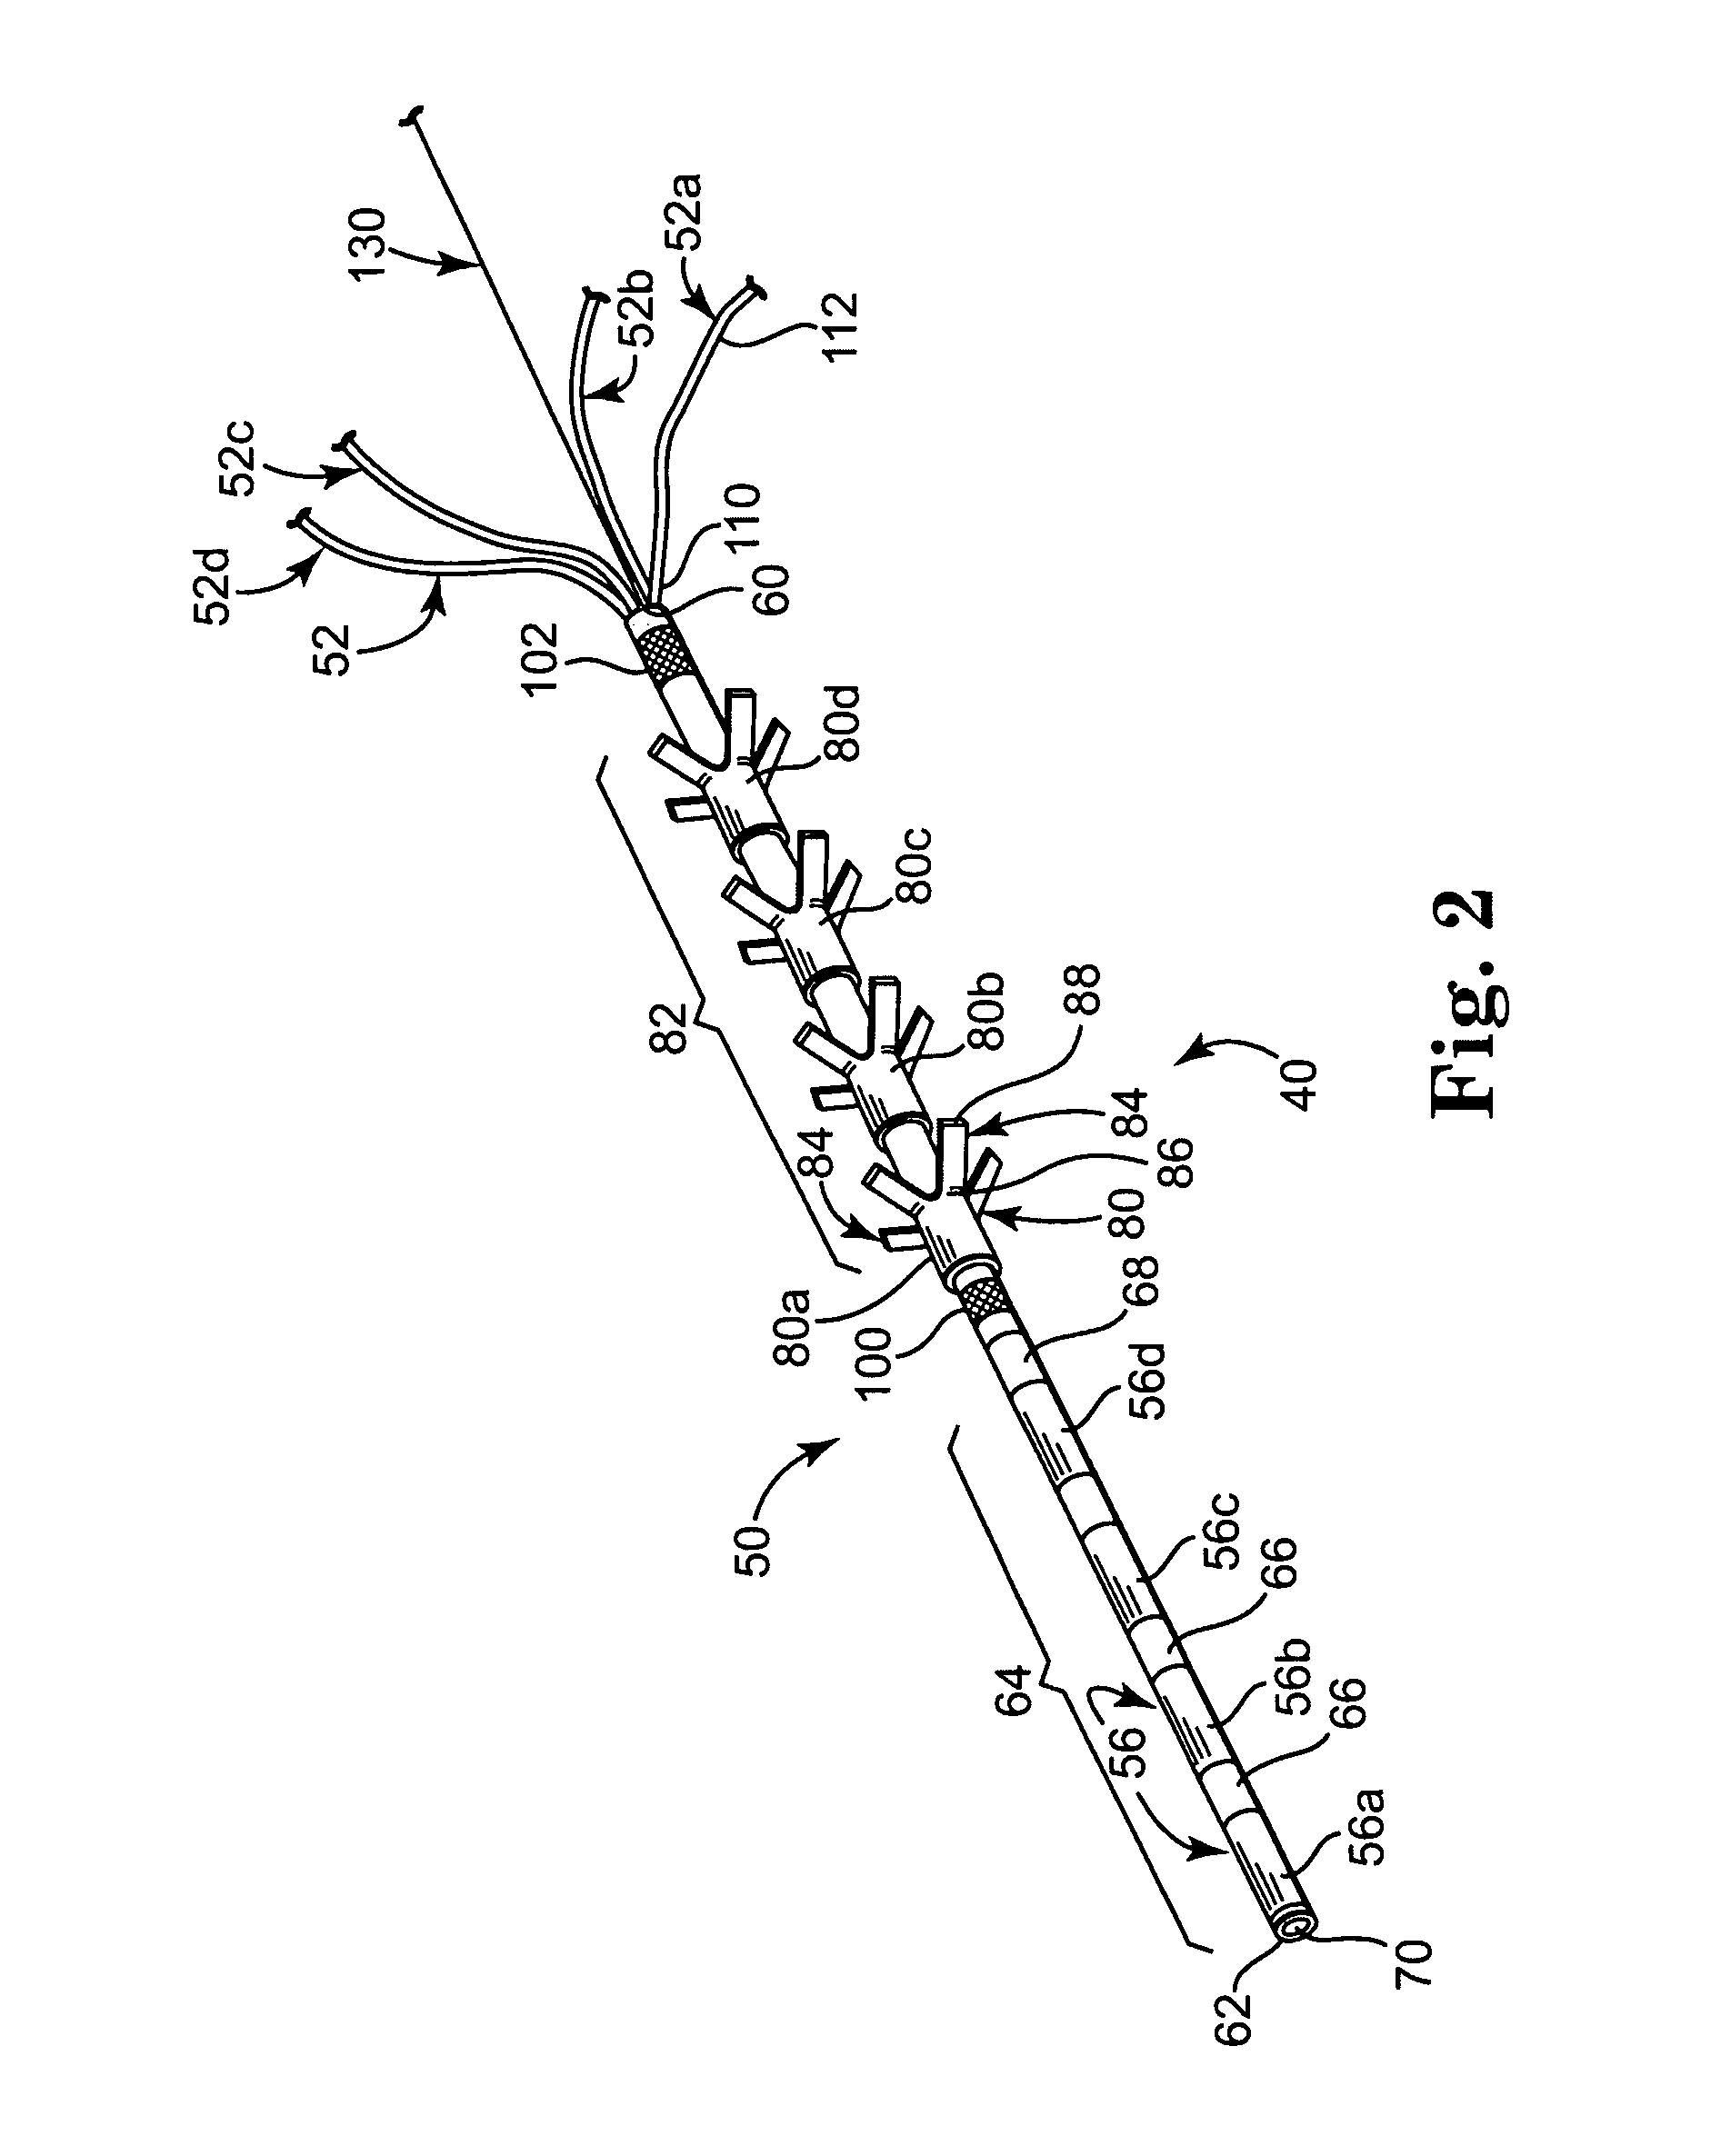 Multi-electrode peripheral nerve evaluation lead and related system and method of use